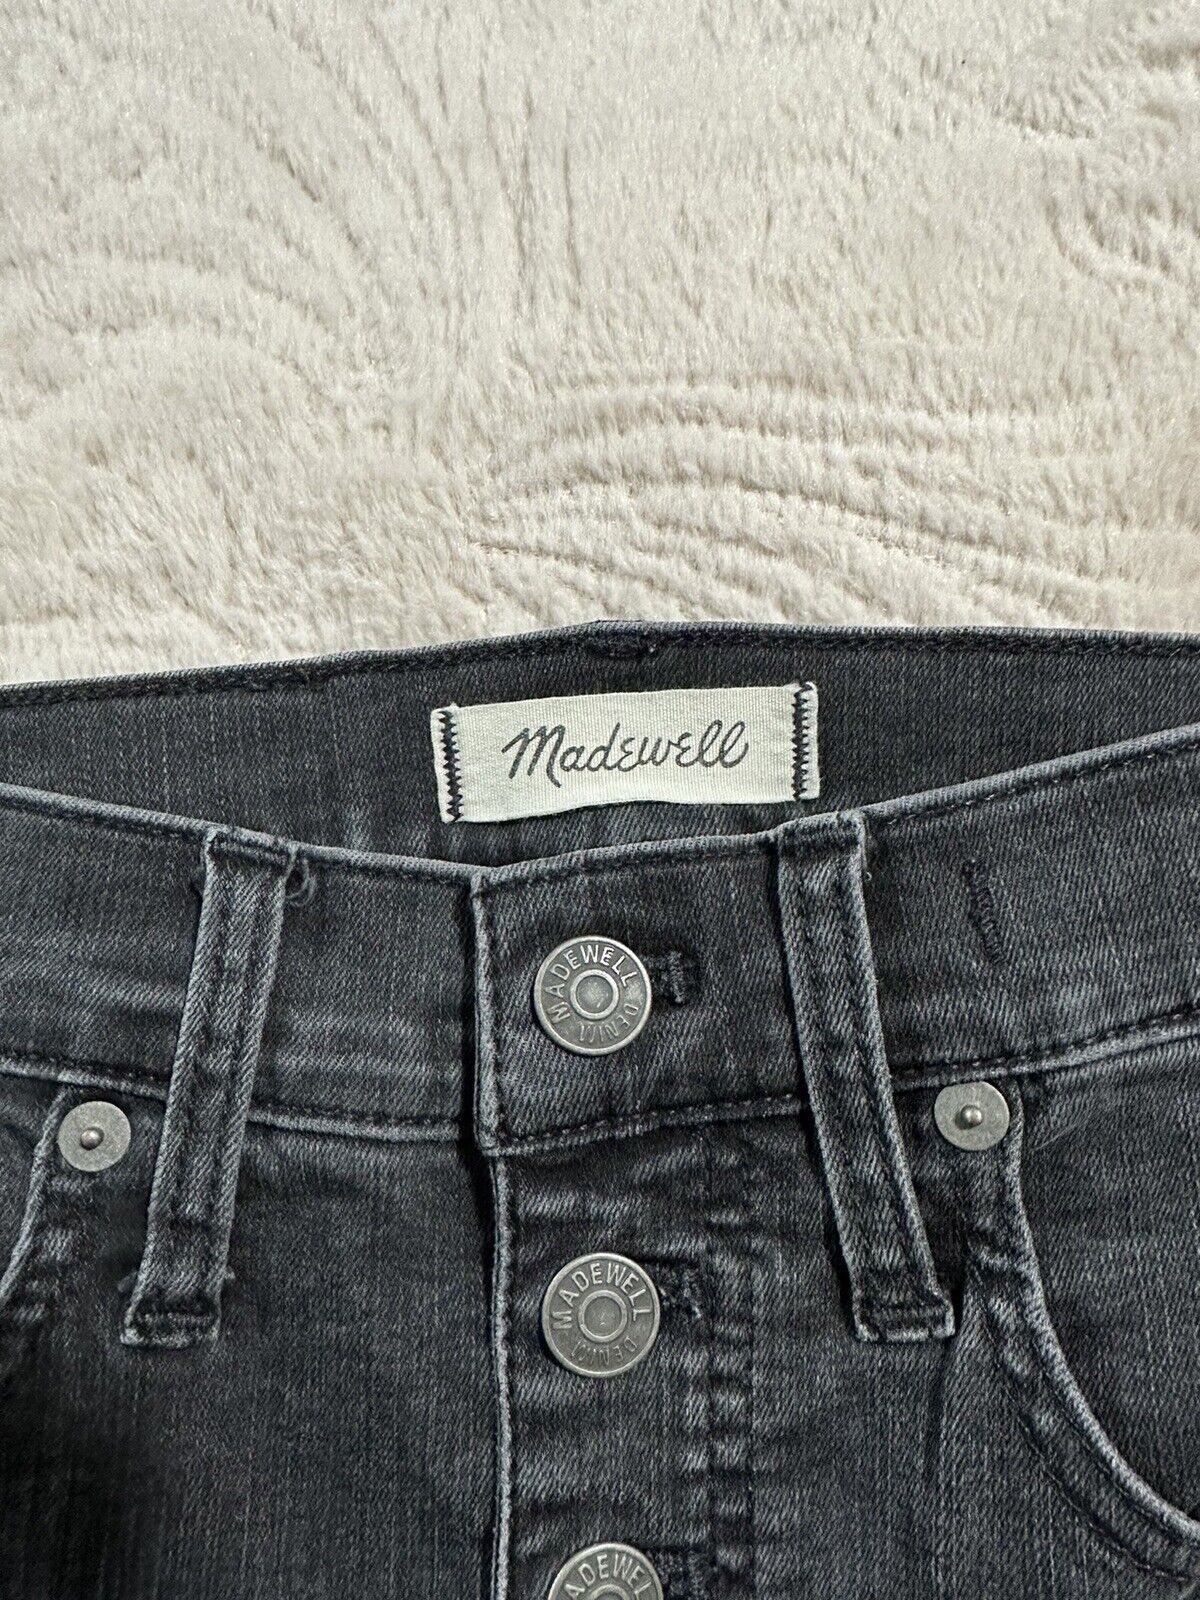 Madewell High Rise Jeans Fade Black Button Fly 23… - image 7